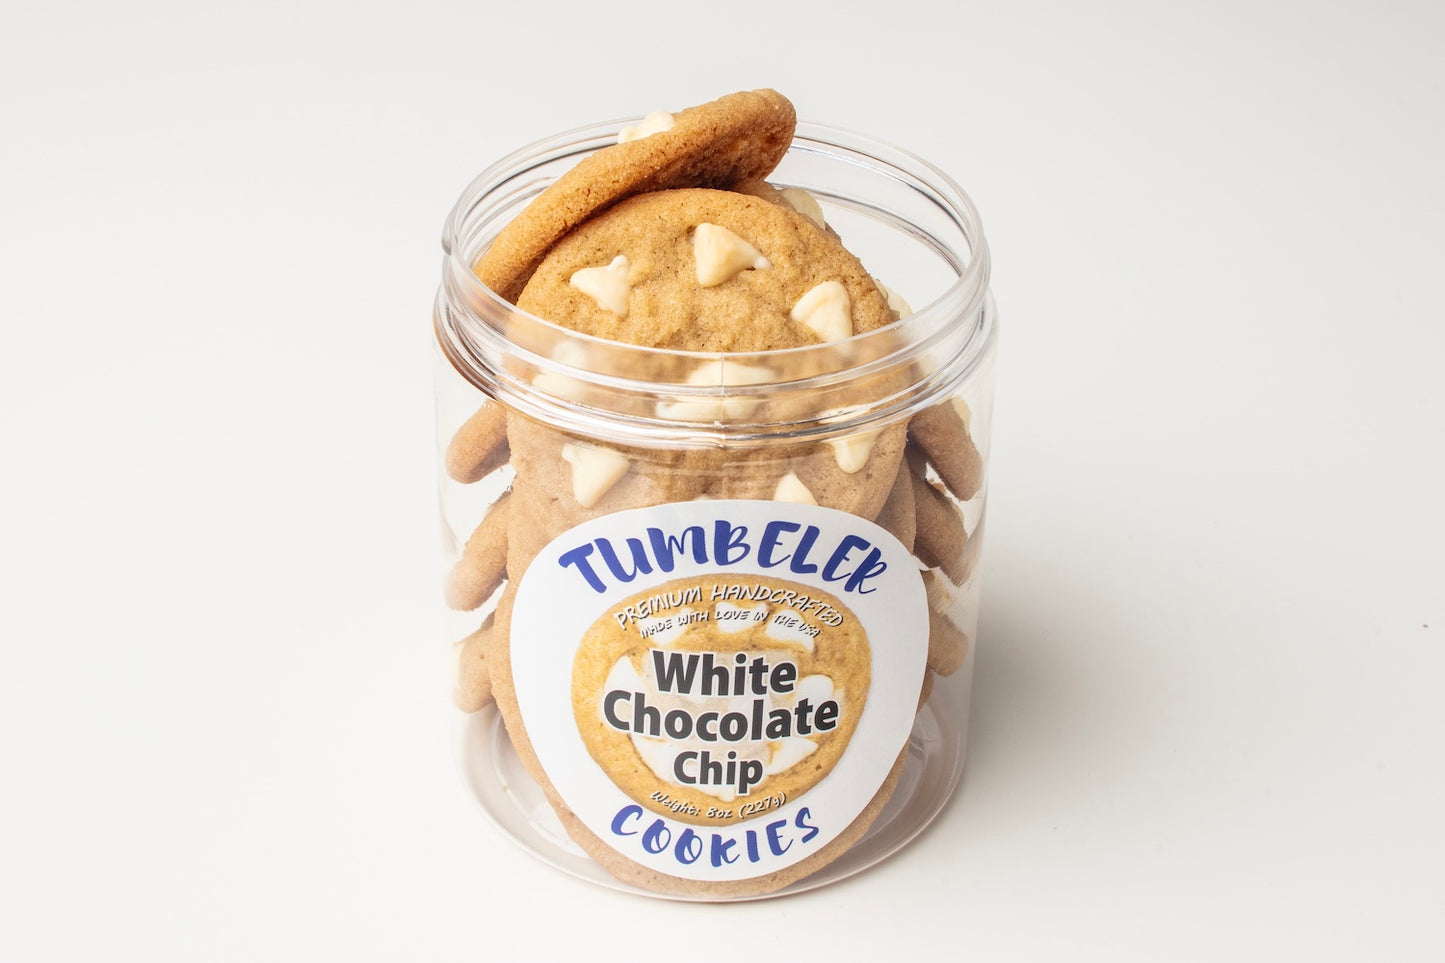 White Chocolate Chip — Tumbeler Cookie with 10 White Chocolate Chips